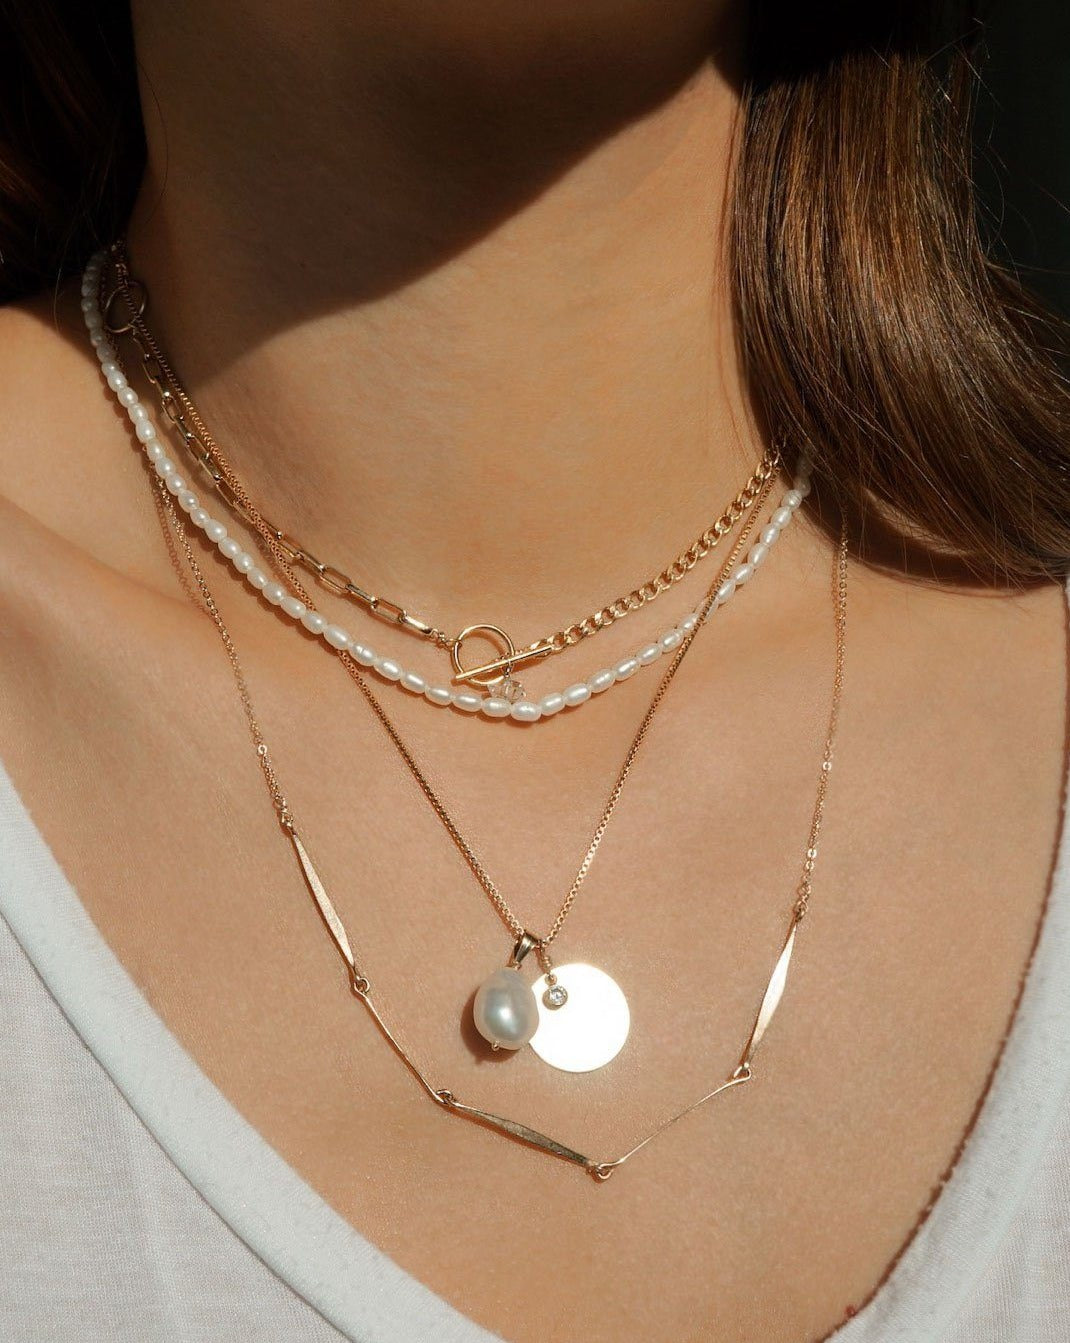 Sylet Necklace by KOZAKH. A 16 to 18 inch adjustable length necklace, crafted in 14K Gold Filled, featuring a 9mm Oval pearl, a 16mm Coin medallion, and a 3mm Cubic Zirconia bezel.